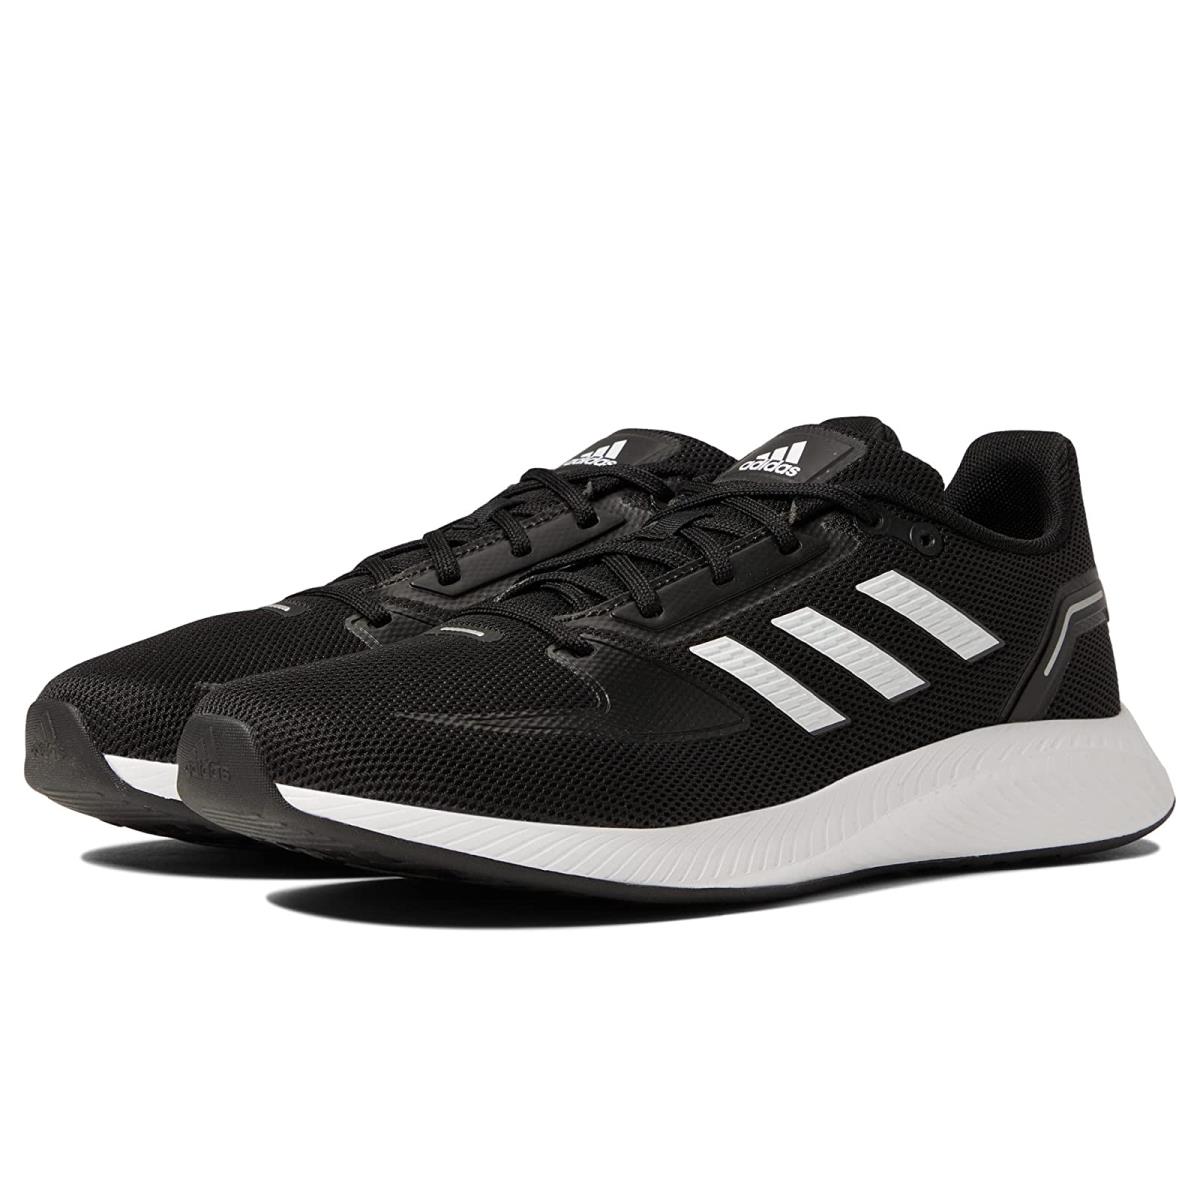 Woman`s Sneakers Athletic Shoes Adidas Running Runfalcon 2.0 Black/White/Grey